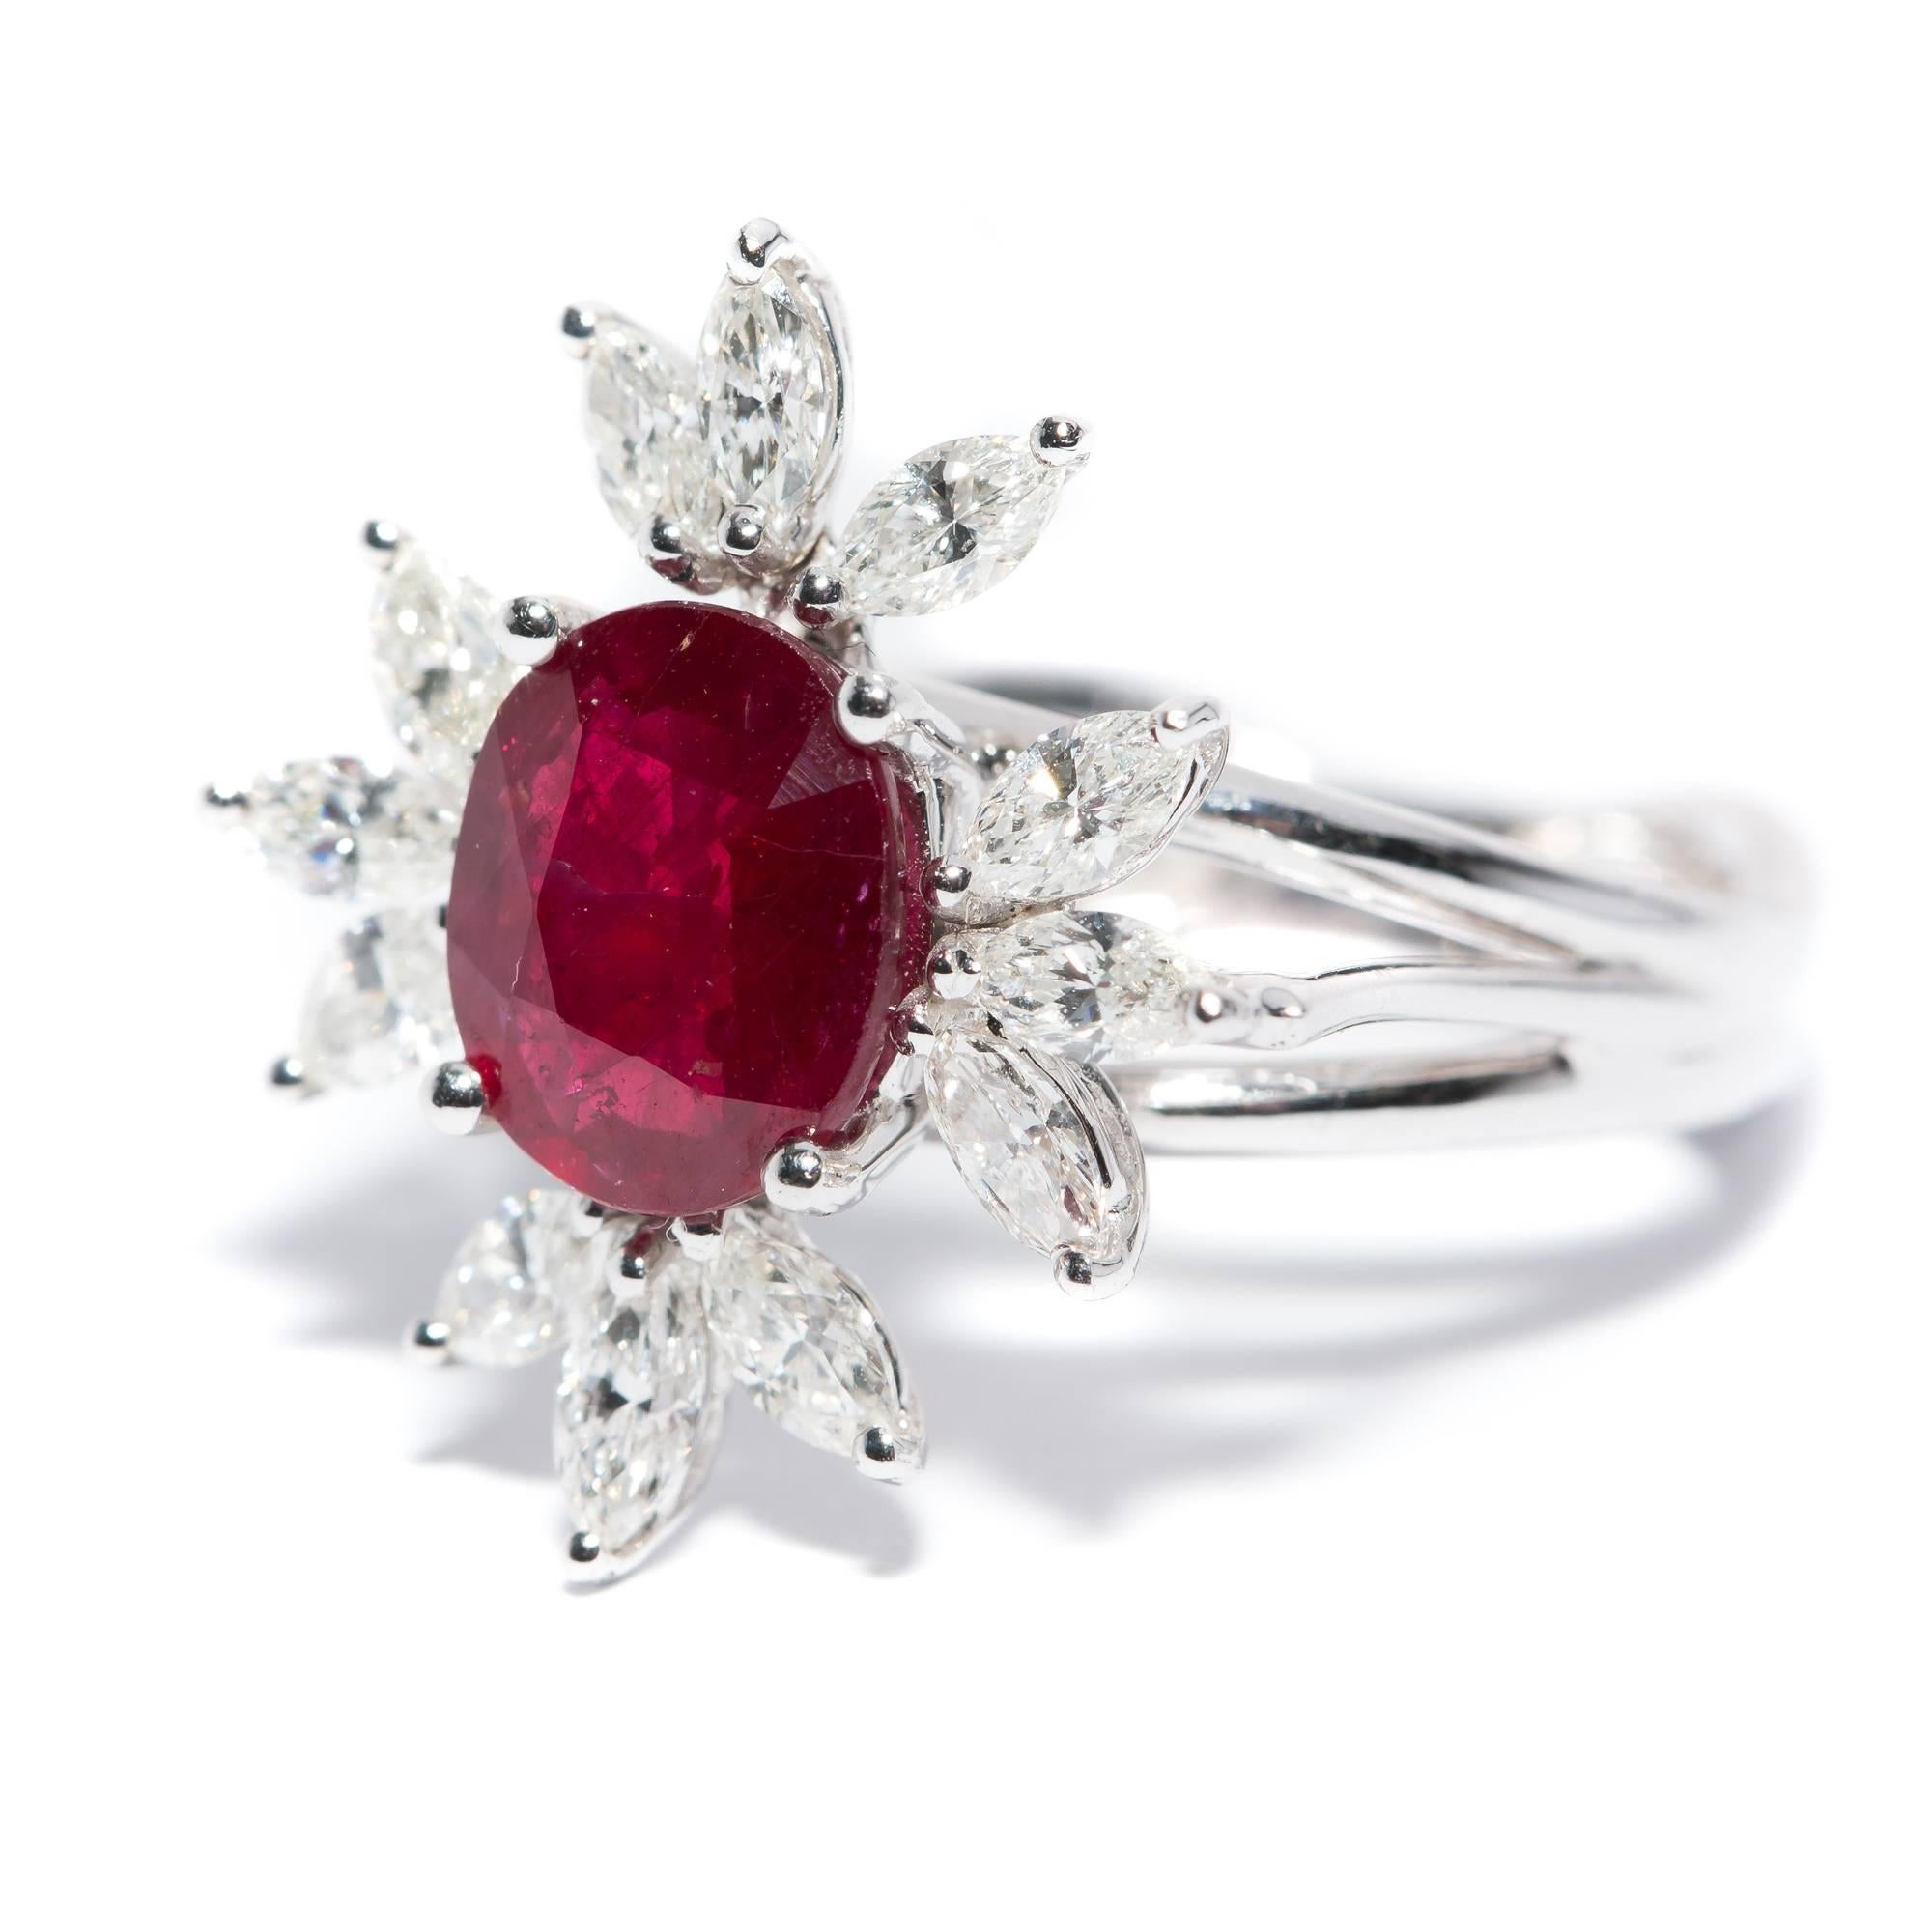 Marquise Cut Bespoke White Marquise Diamond 18KT Gold 2.00 Carat Ruby Engagement Ring Mount